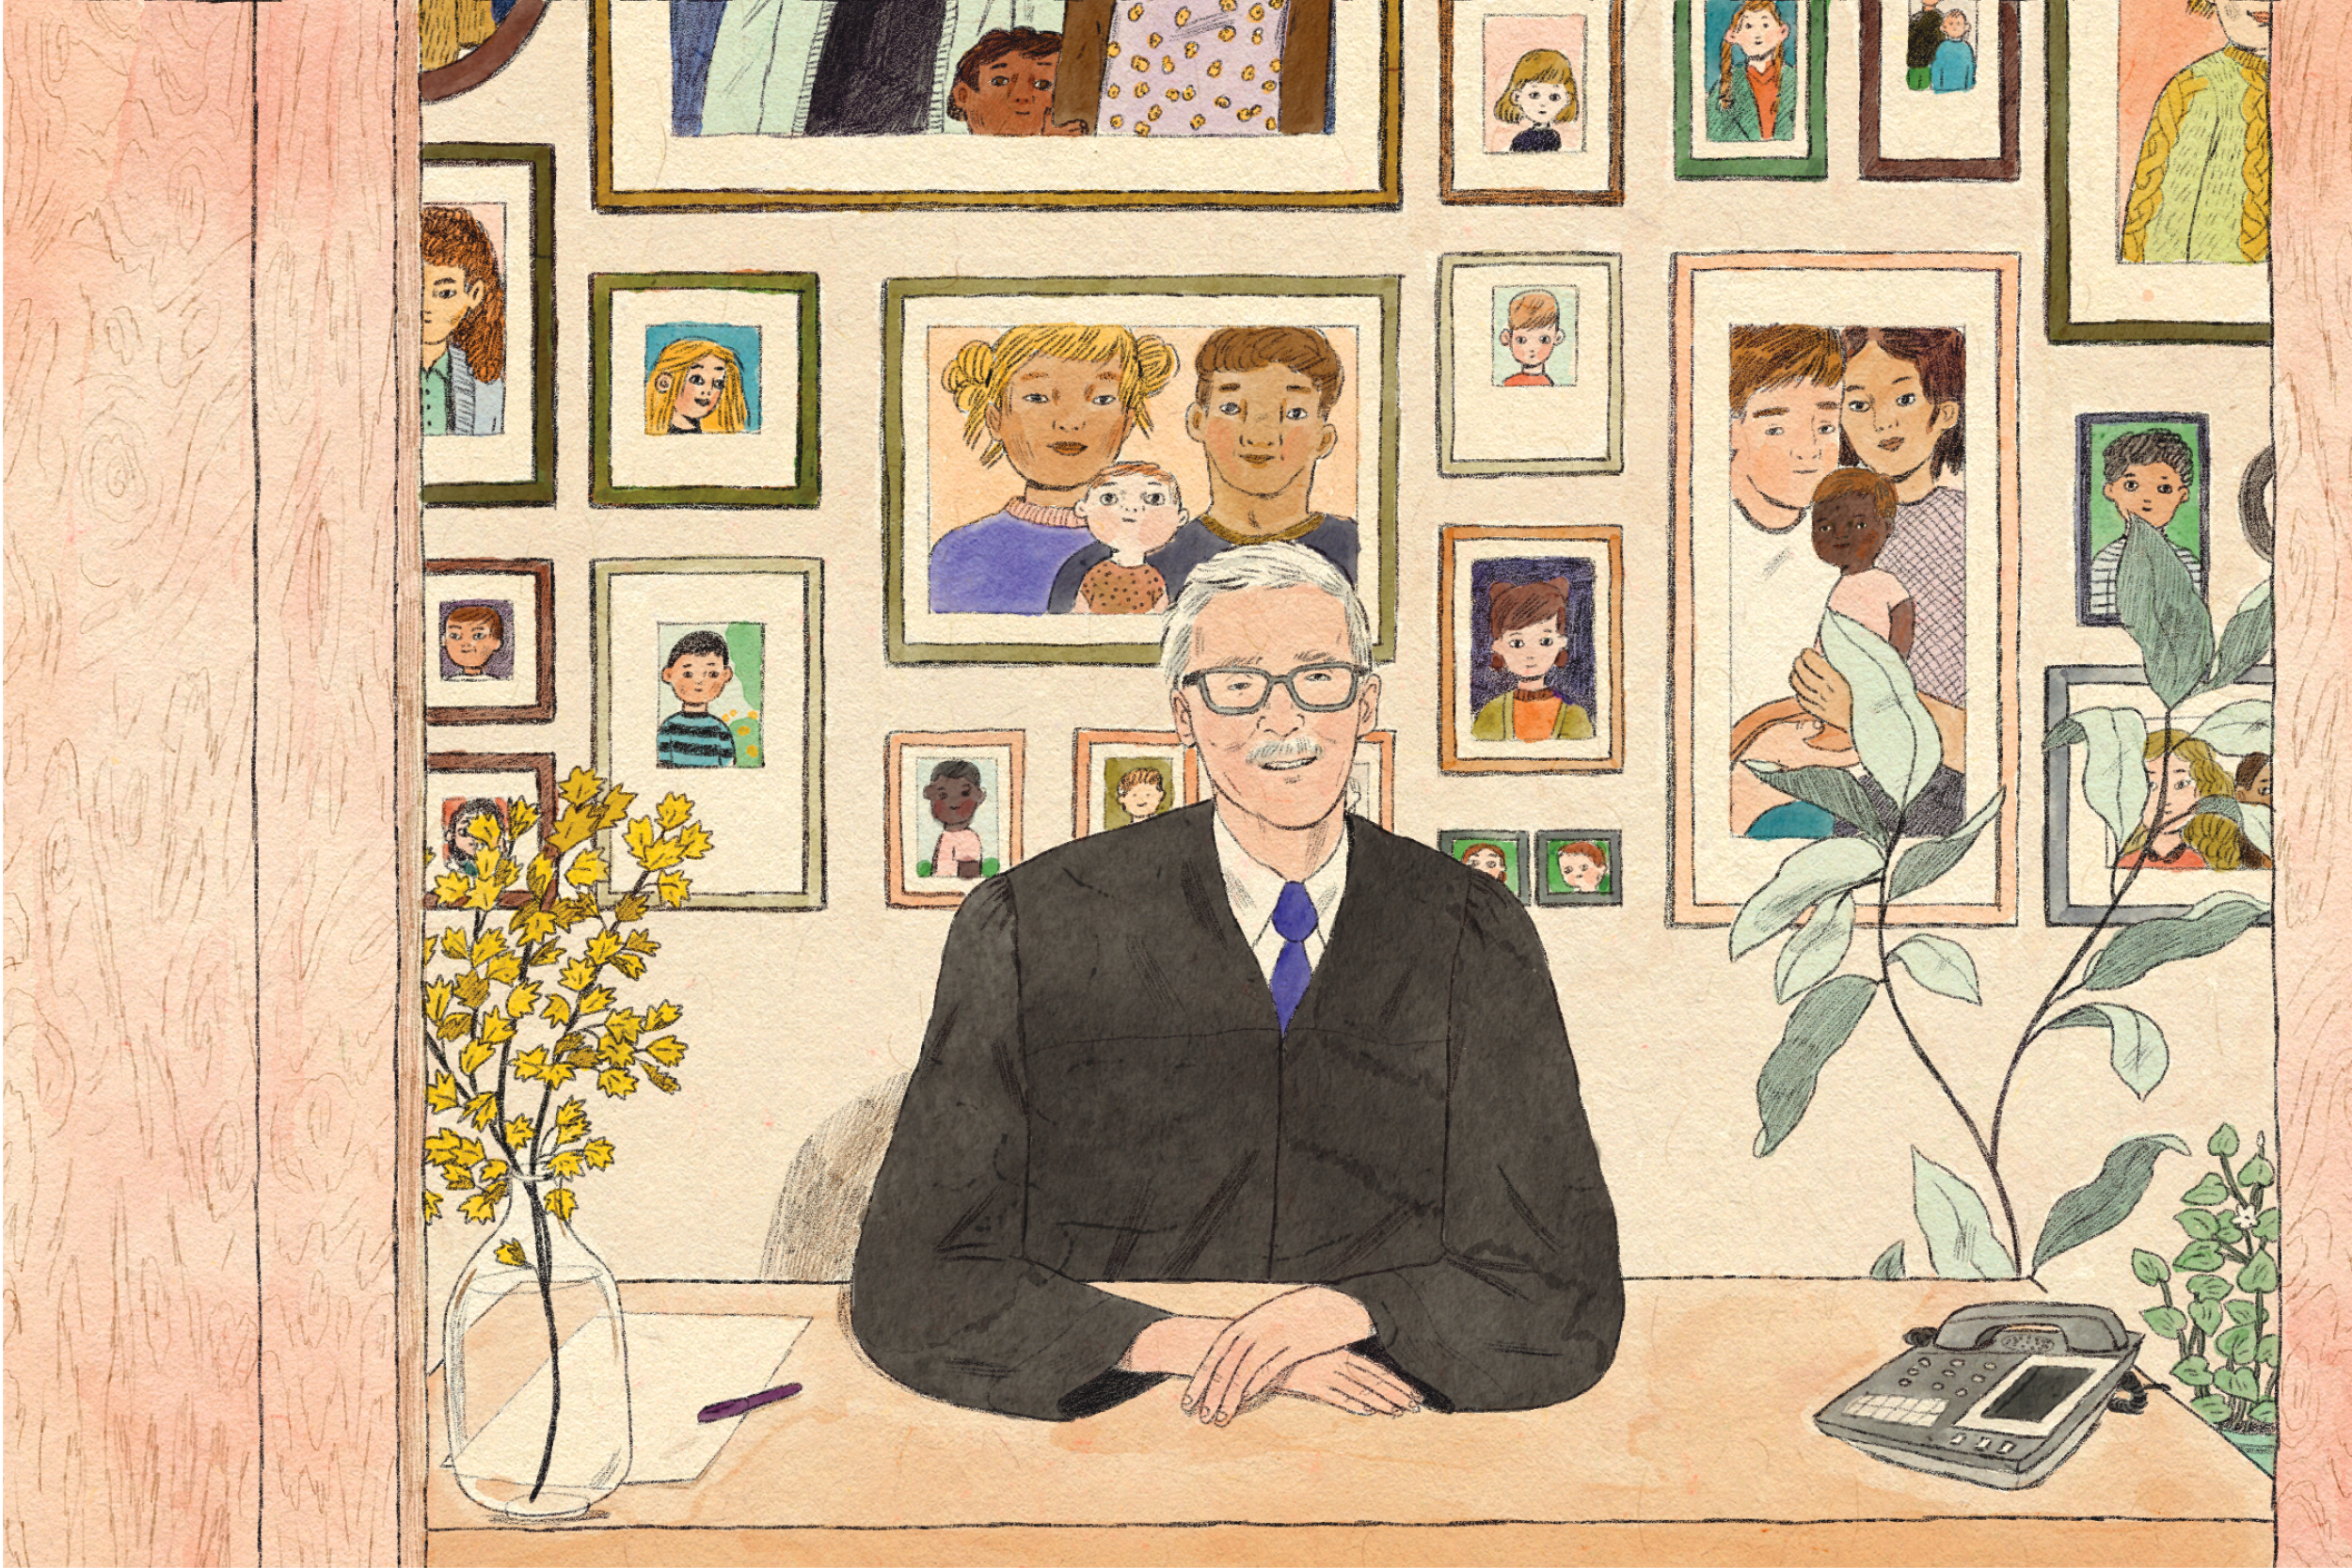 Judge Folely with adopted children illustration